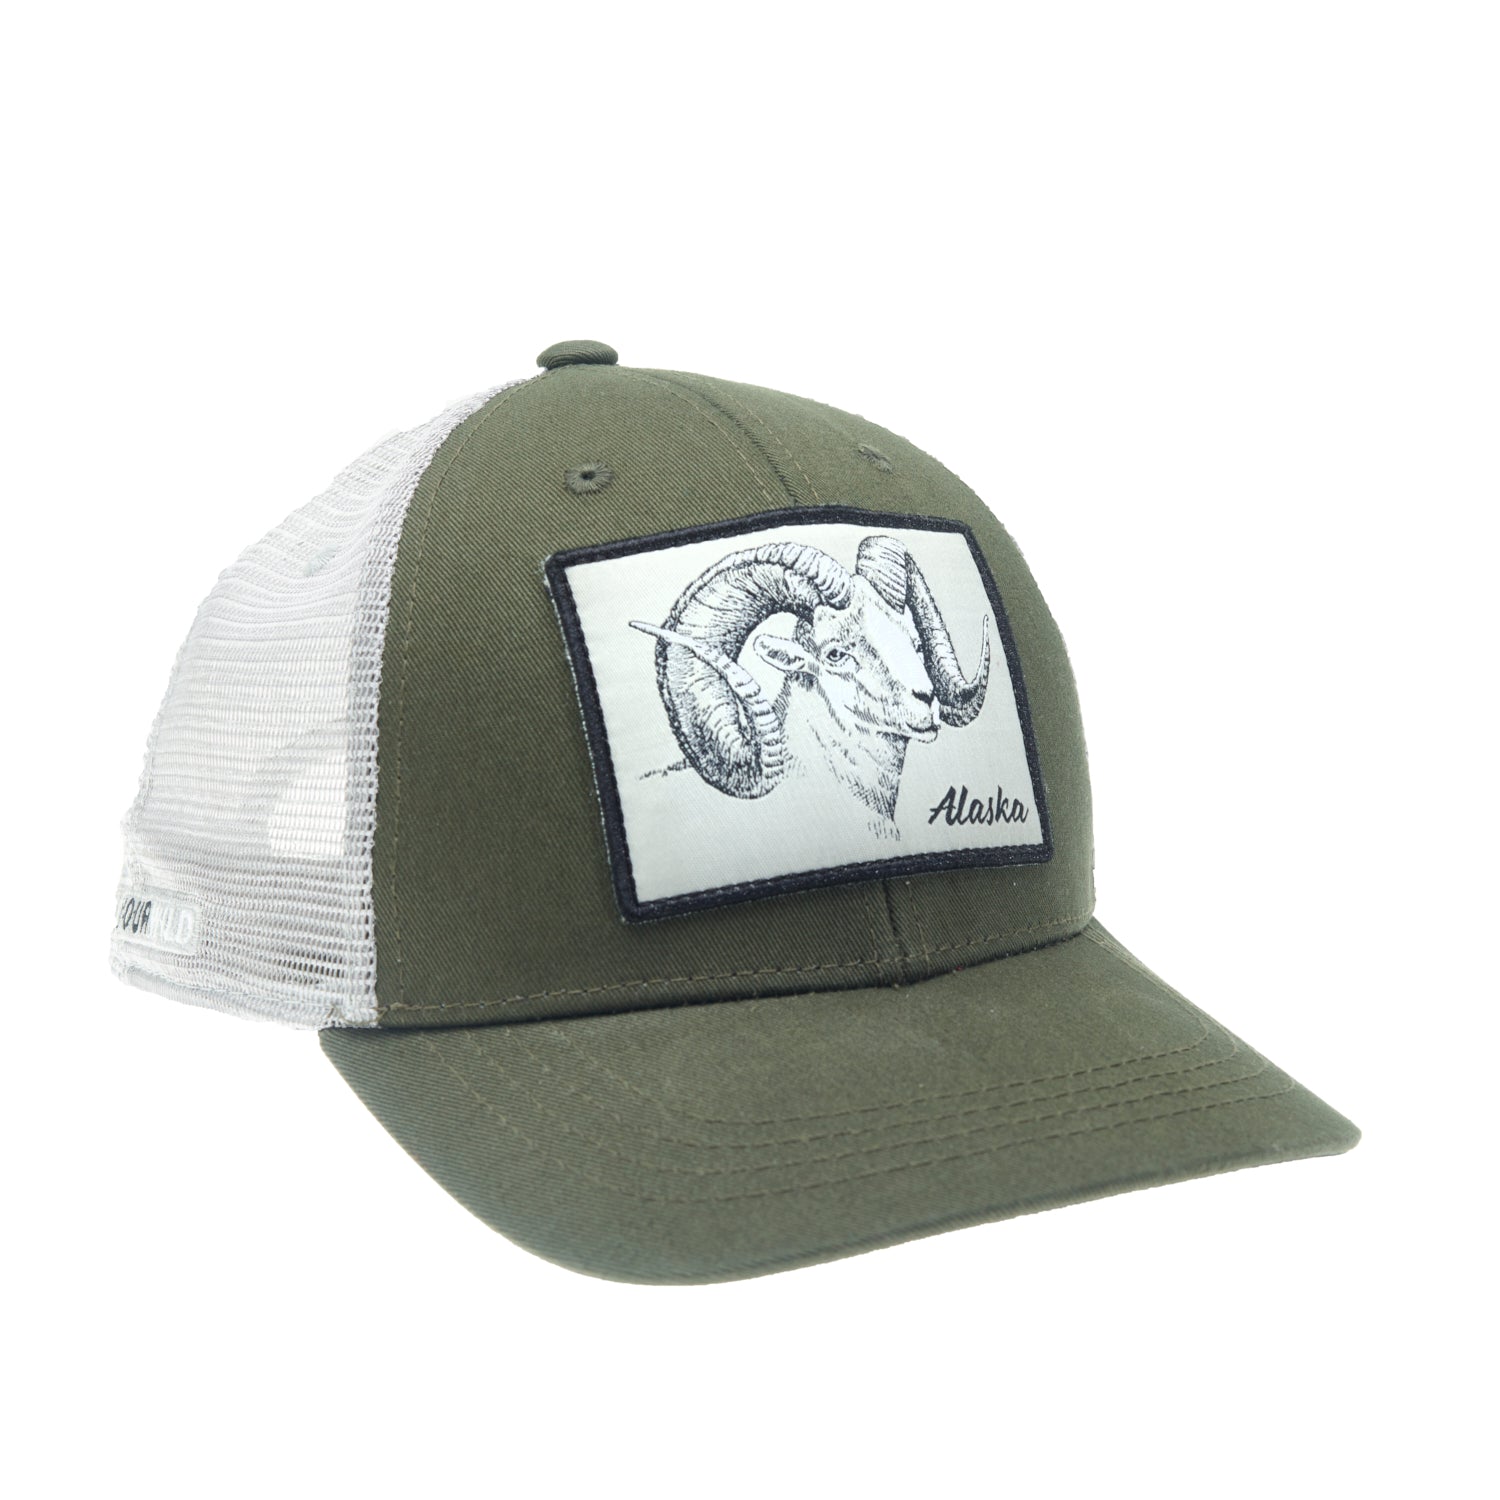 A baseball style cap has green fabric on front with a large patch showing a dall sheep and the word alaska on it the back mesh is light gray